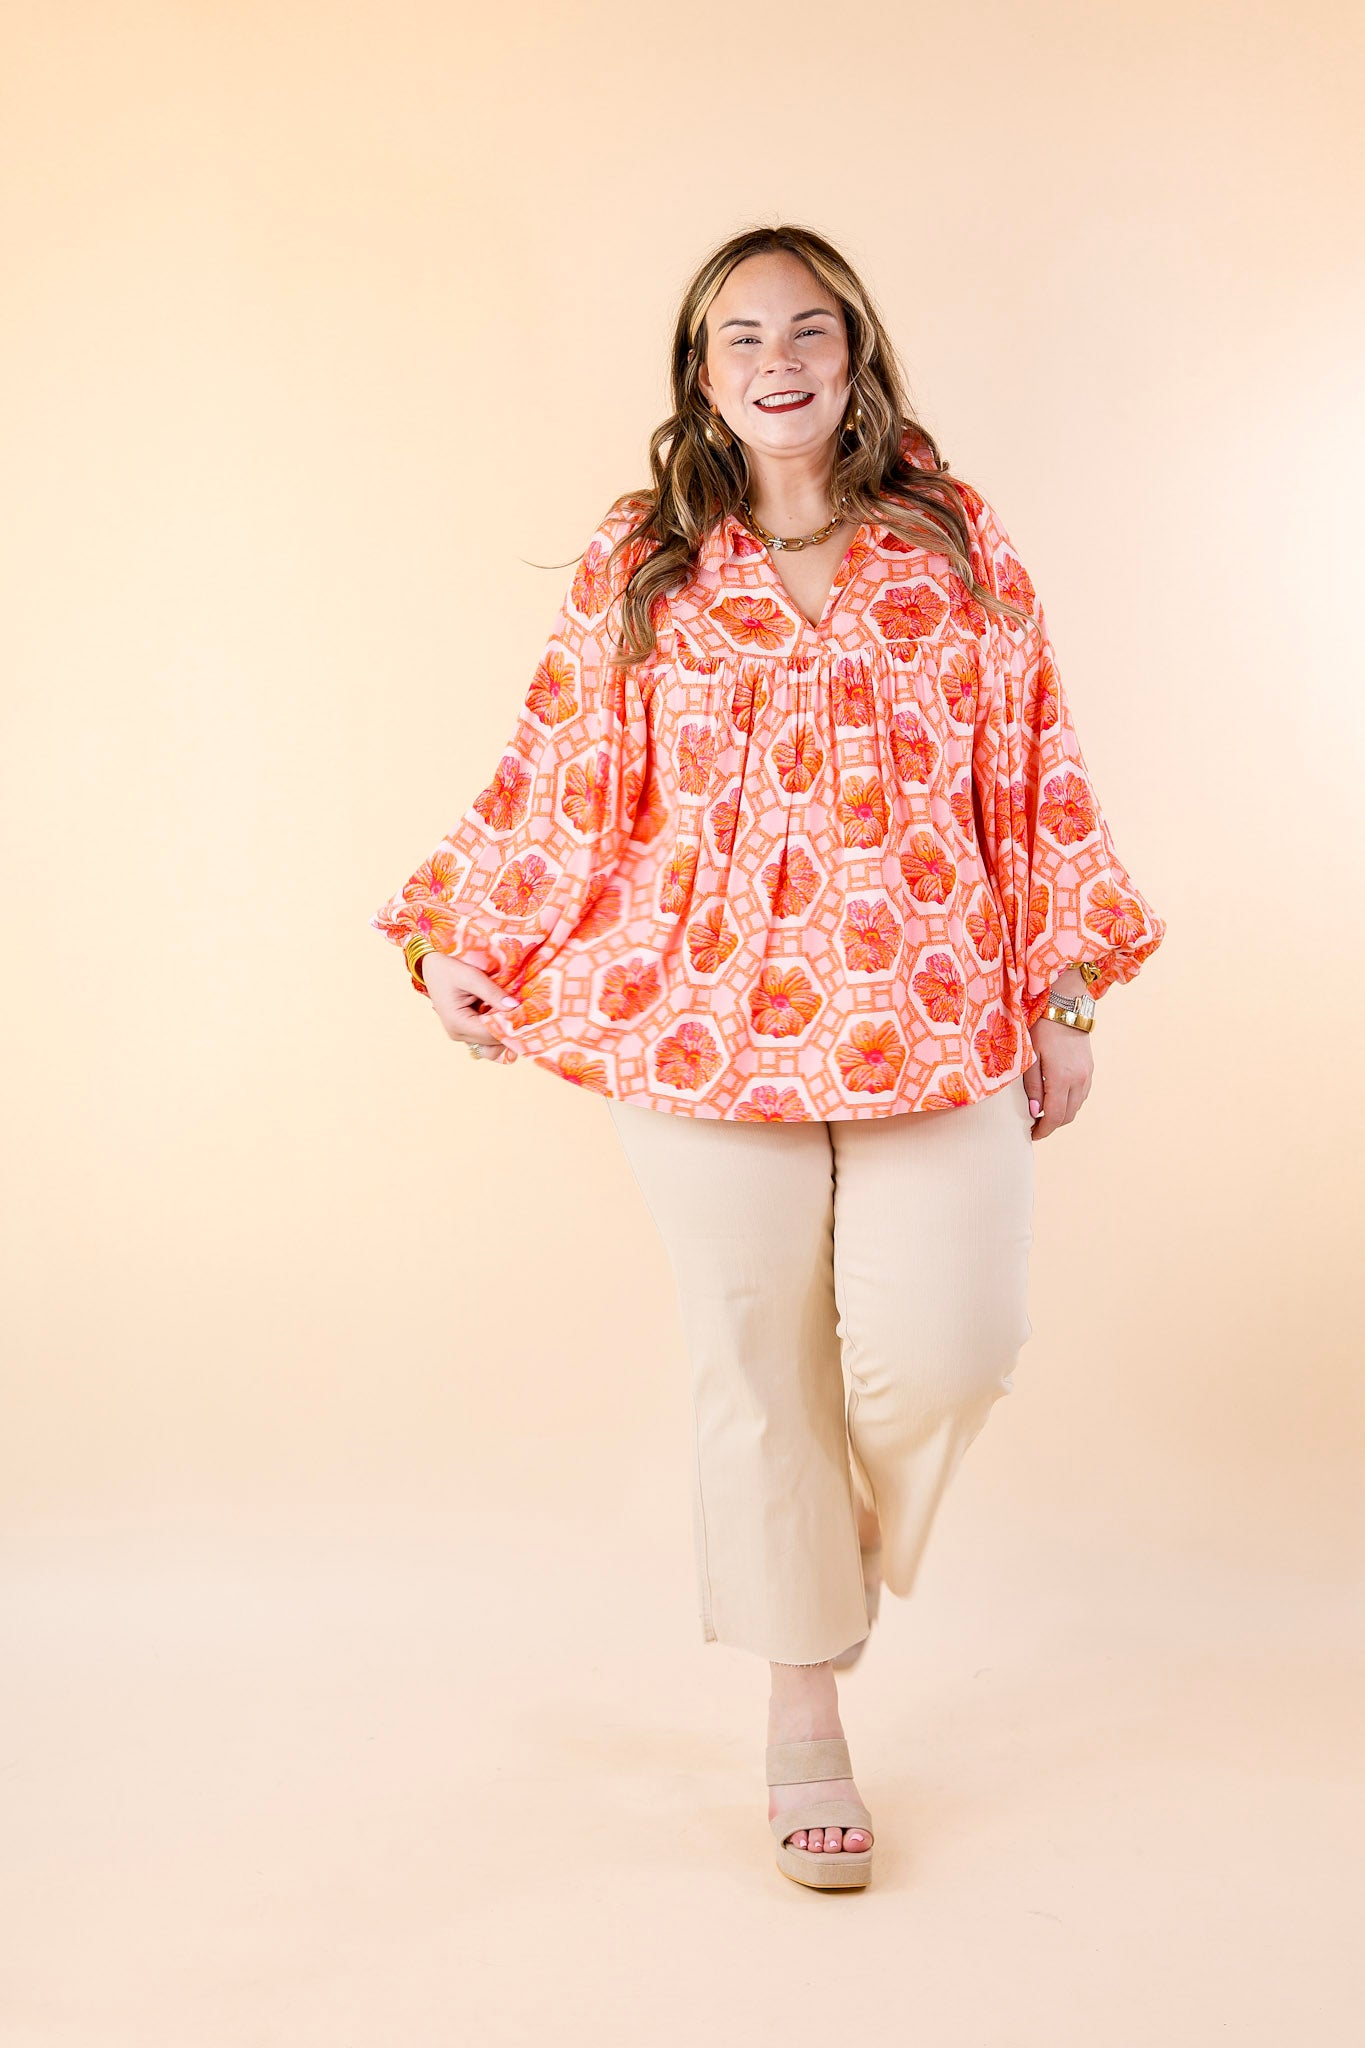 Emily McCarthy | Stella Crocheted Top in Floral Print - Giddy Up Glamour Boutique